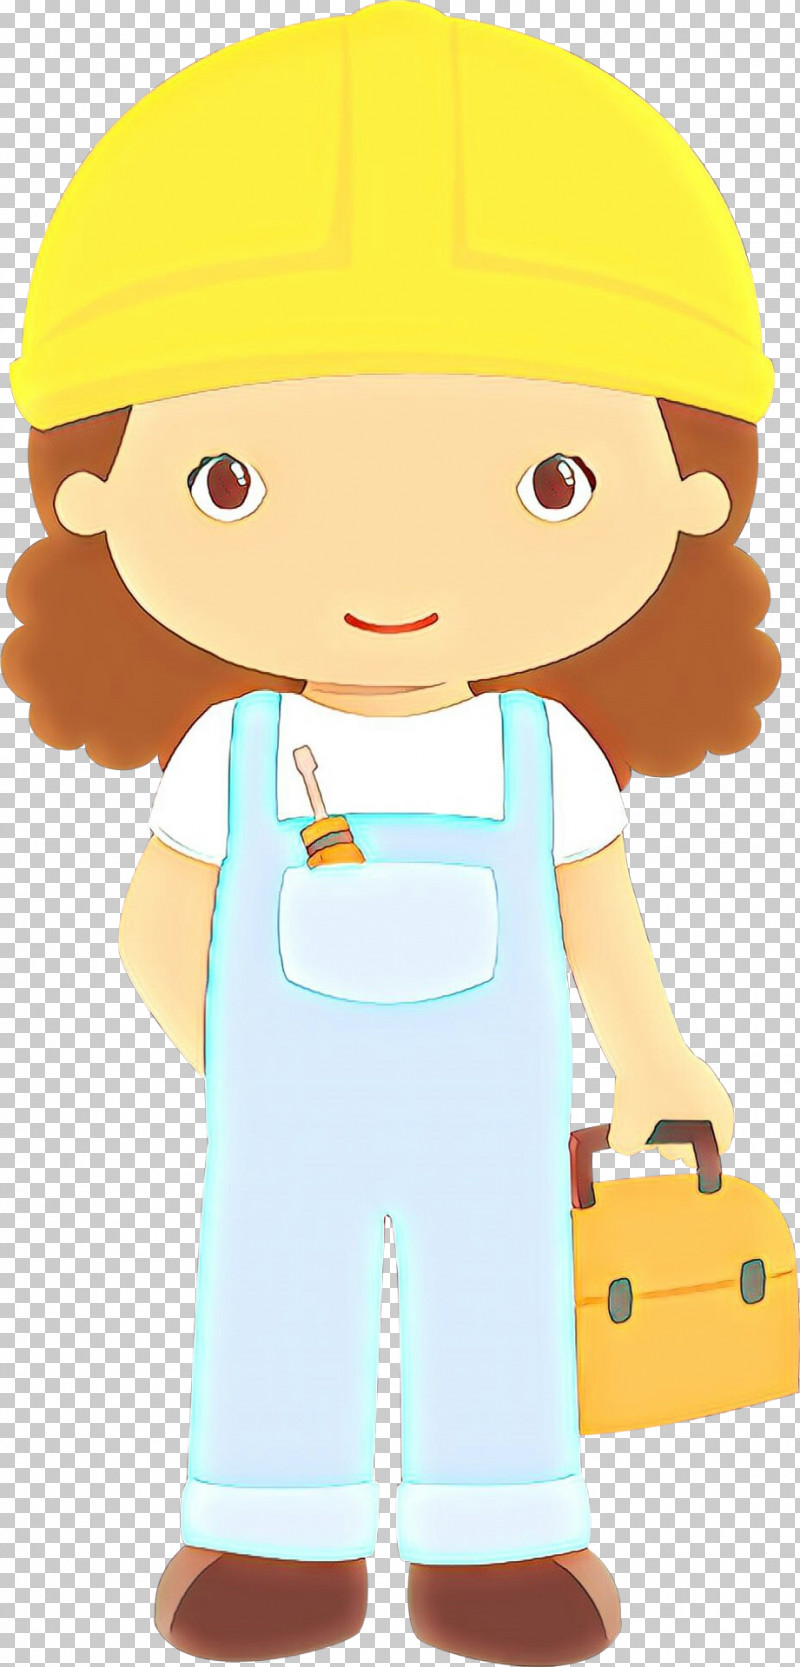 Cartoon Toy Child PNG, Clipart, Cartoon, Child, Toy Free PNG Download